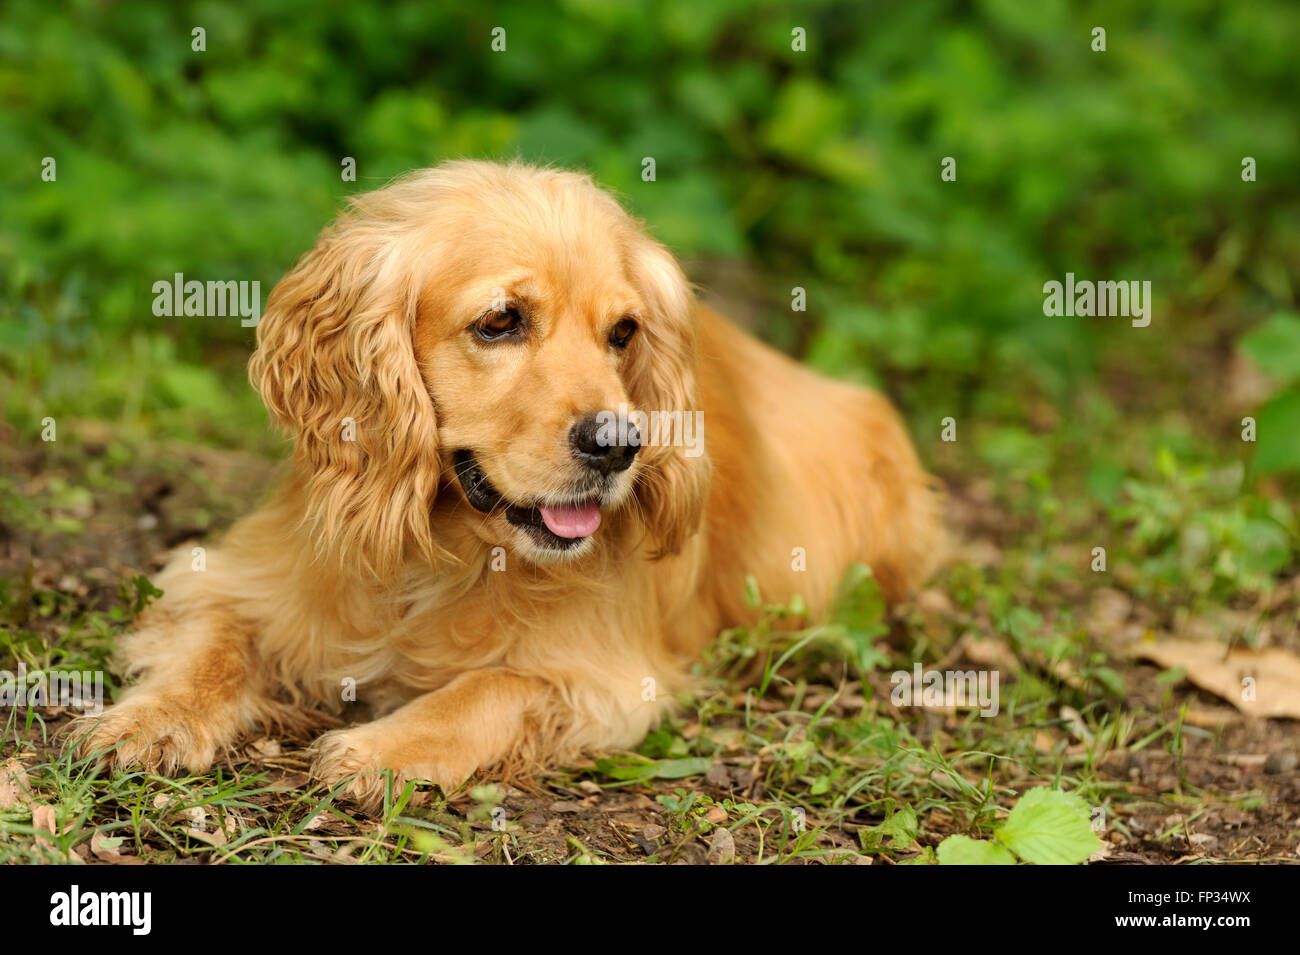 Cute dog is a beautiful Cocker Spaniel lying down in a nature setting. Stock Photo